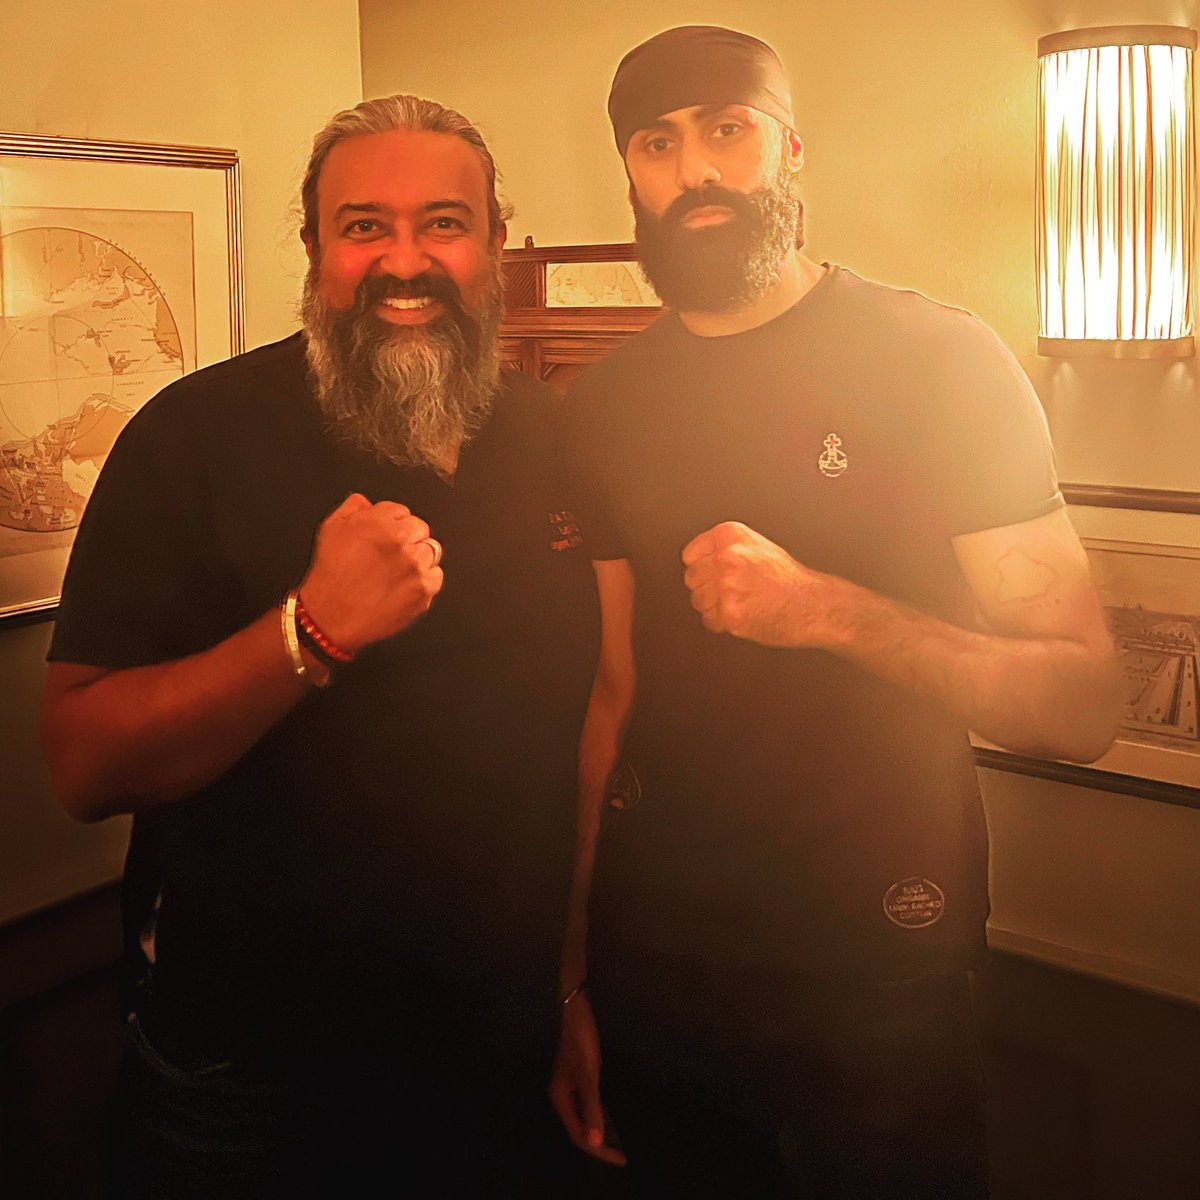 Very exciting times at HarleyDoc HQ! Thrilled to announce the collaboration between HarleyDoc and Inder Singh Bassi…here’s to a great future working together…let’s go champ!❤️🥊🔥🙏🏾

#HarleyDoc #GlobalHealth #Concierge #HarleyDocXInderSinghBassi #InderBassi #Champ #LetsGoChamp